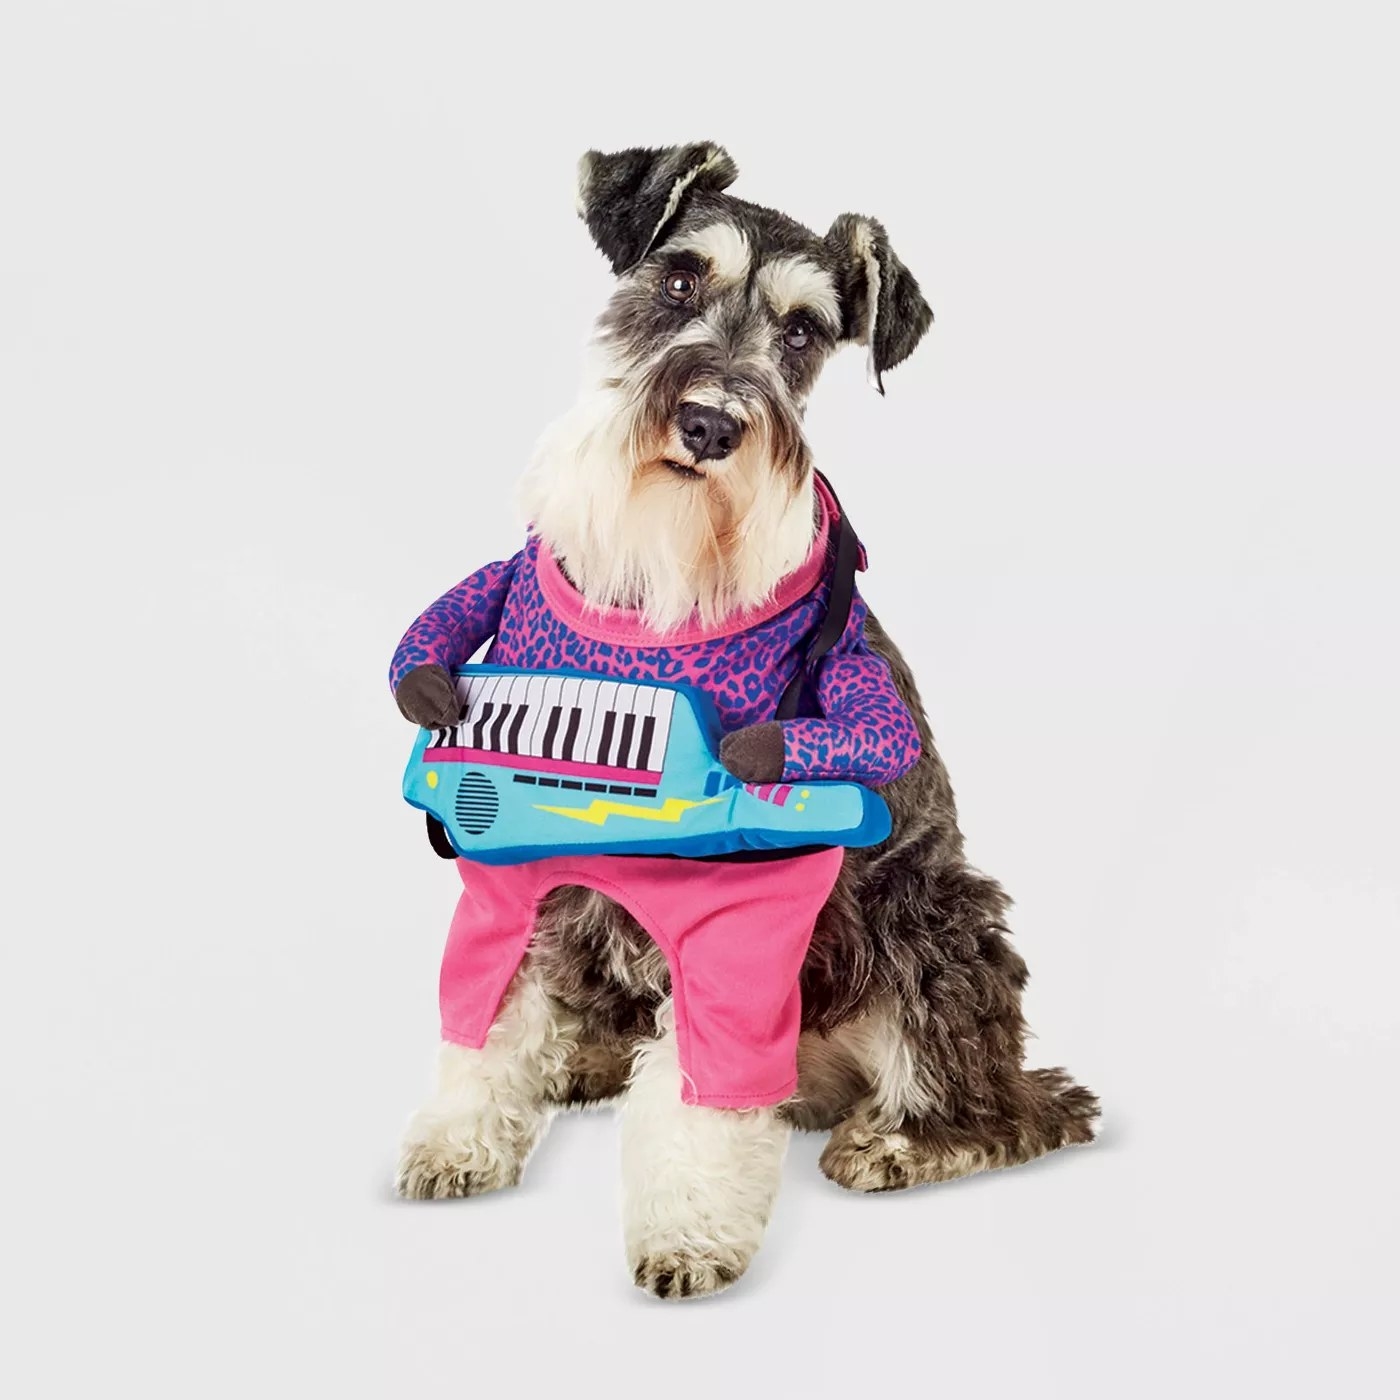 A dog wearing the guitarist costume